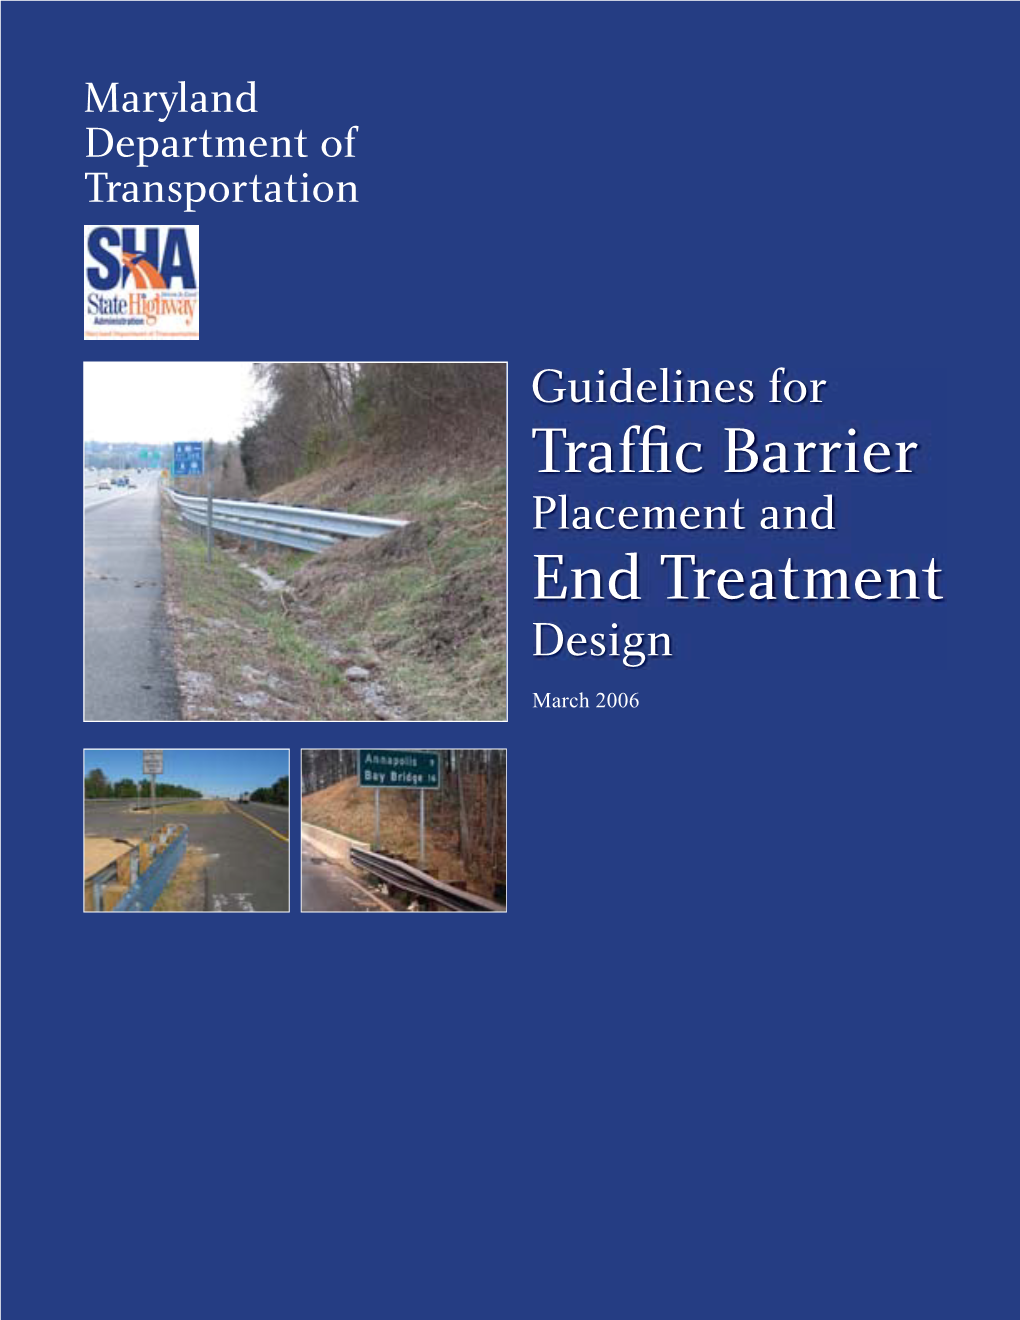 Guidelines for Traffic Barrier Placement and End Treatment Design